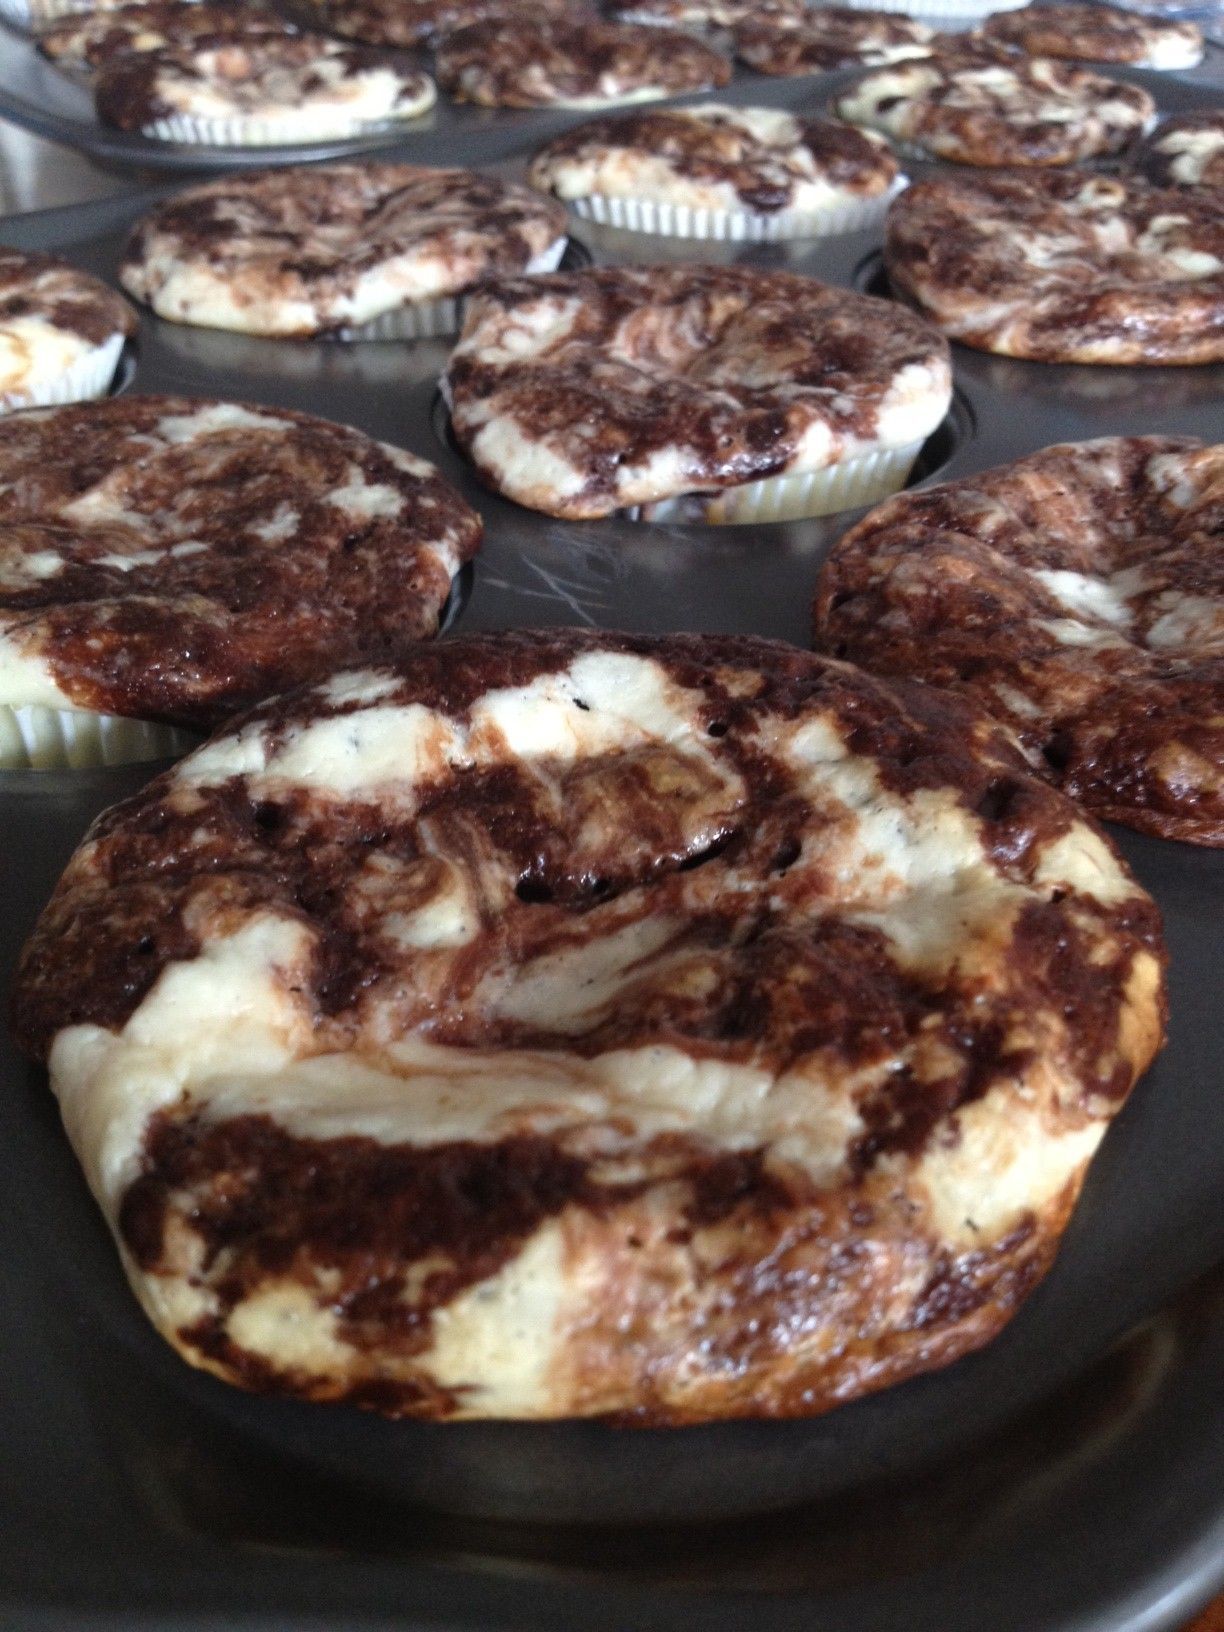 Can you believe that this is SKINNY?? Chocolate Cheesecake Cupcakes (black botto